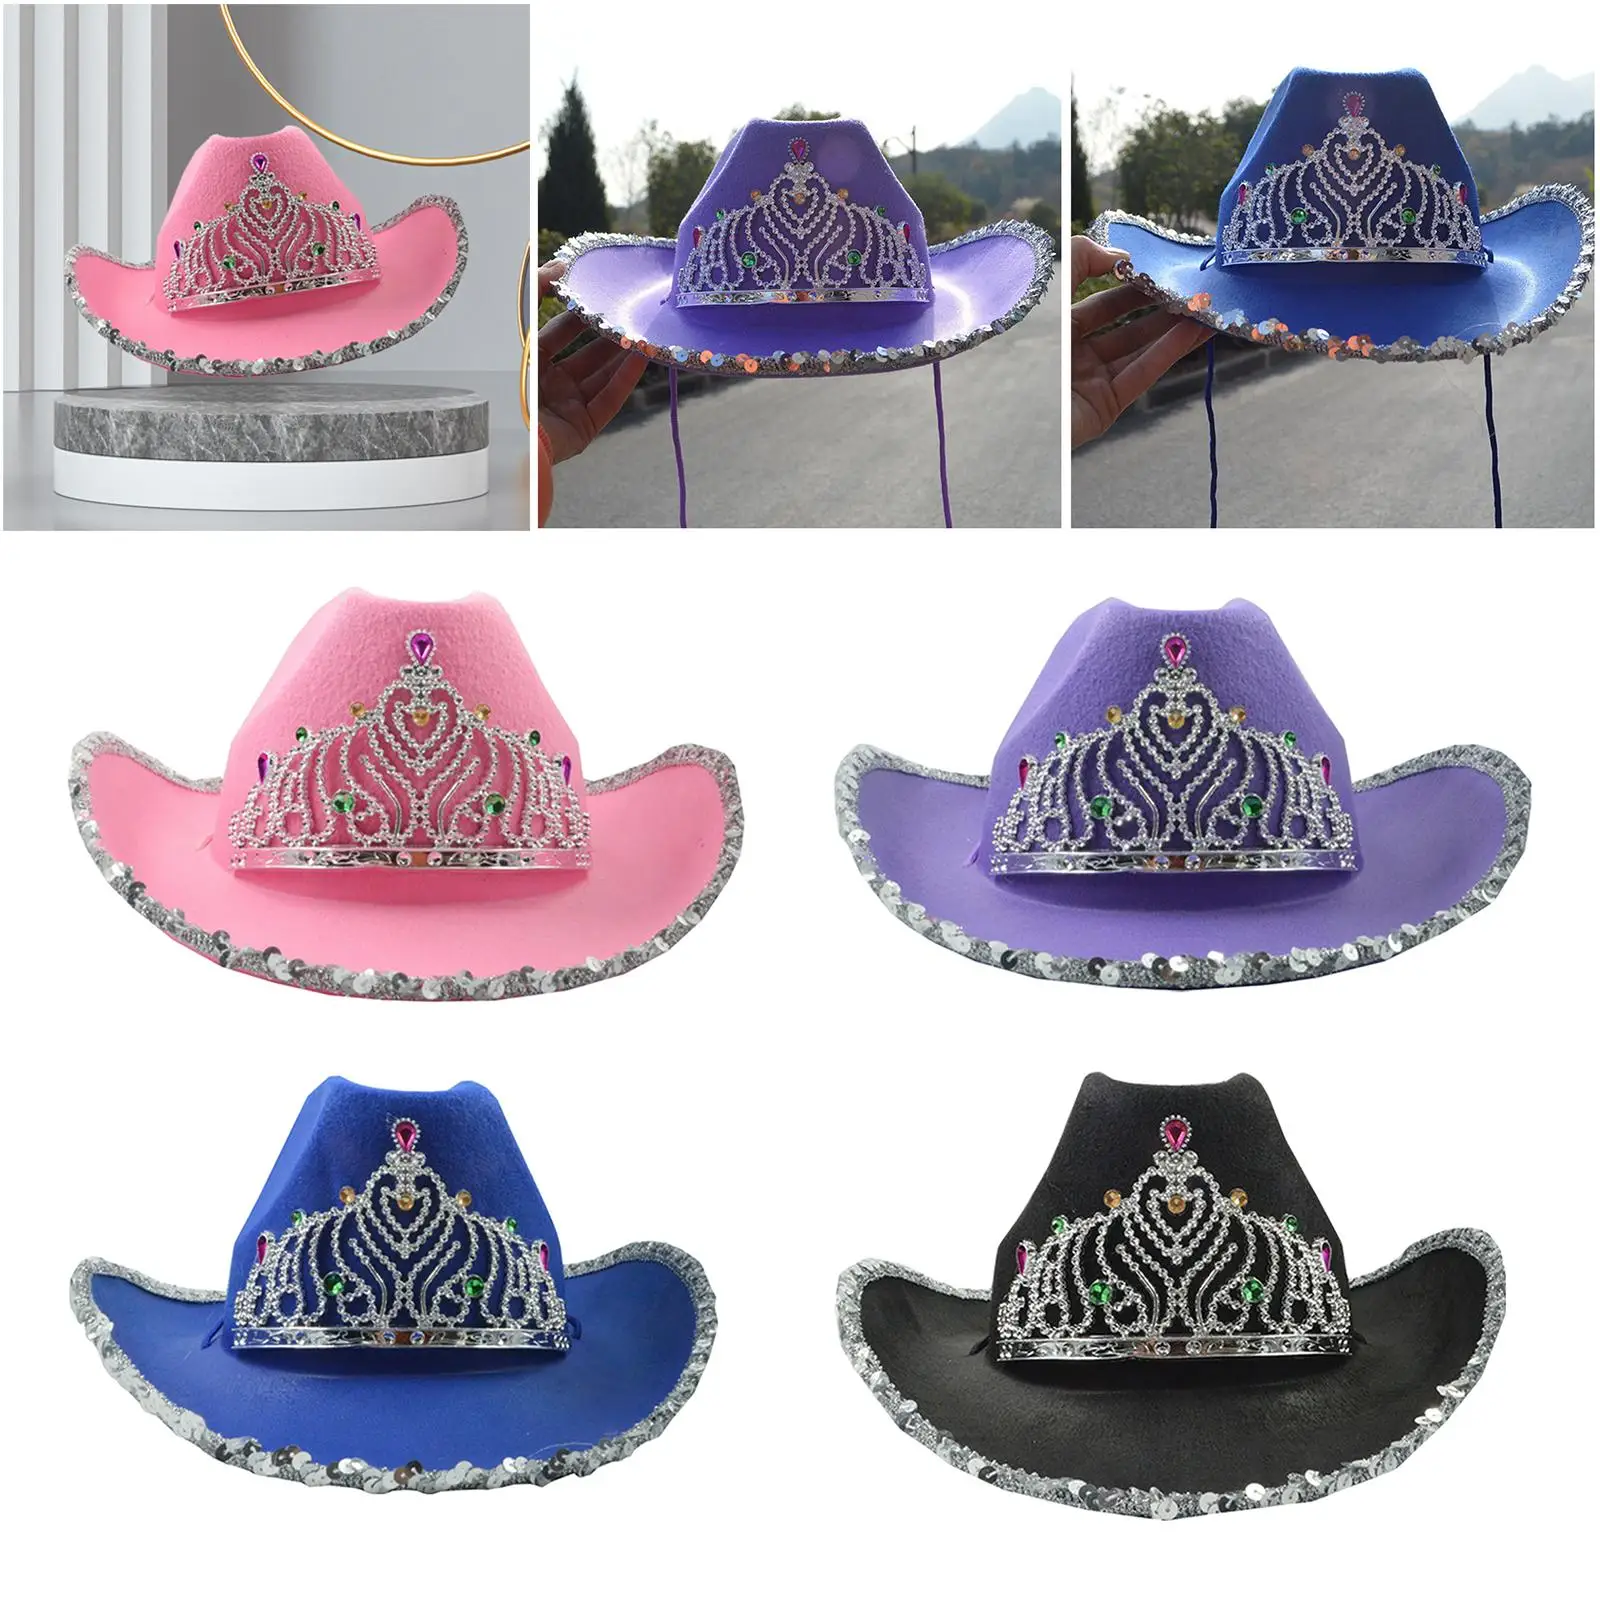 Western Accessories Cowgirl Costume Cowboy Hat Big Crown Felt Sequin Beaded Party Hats for Women